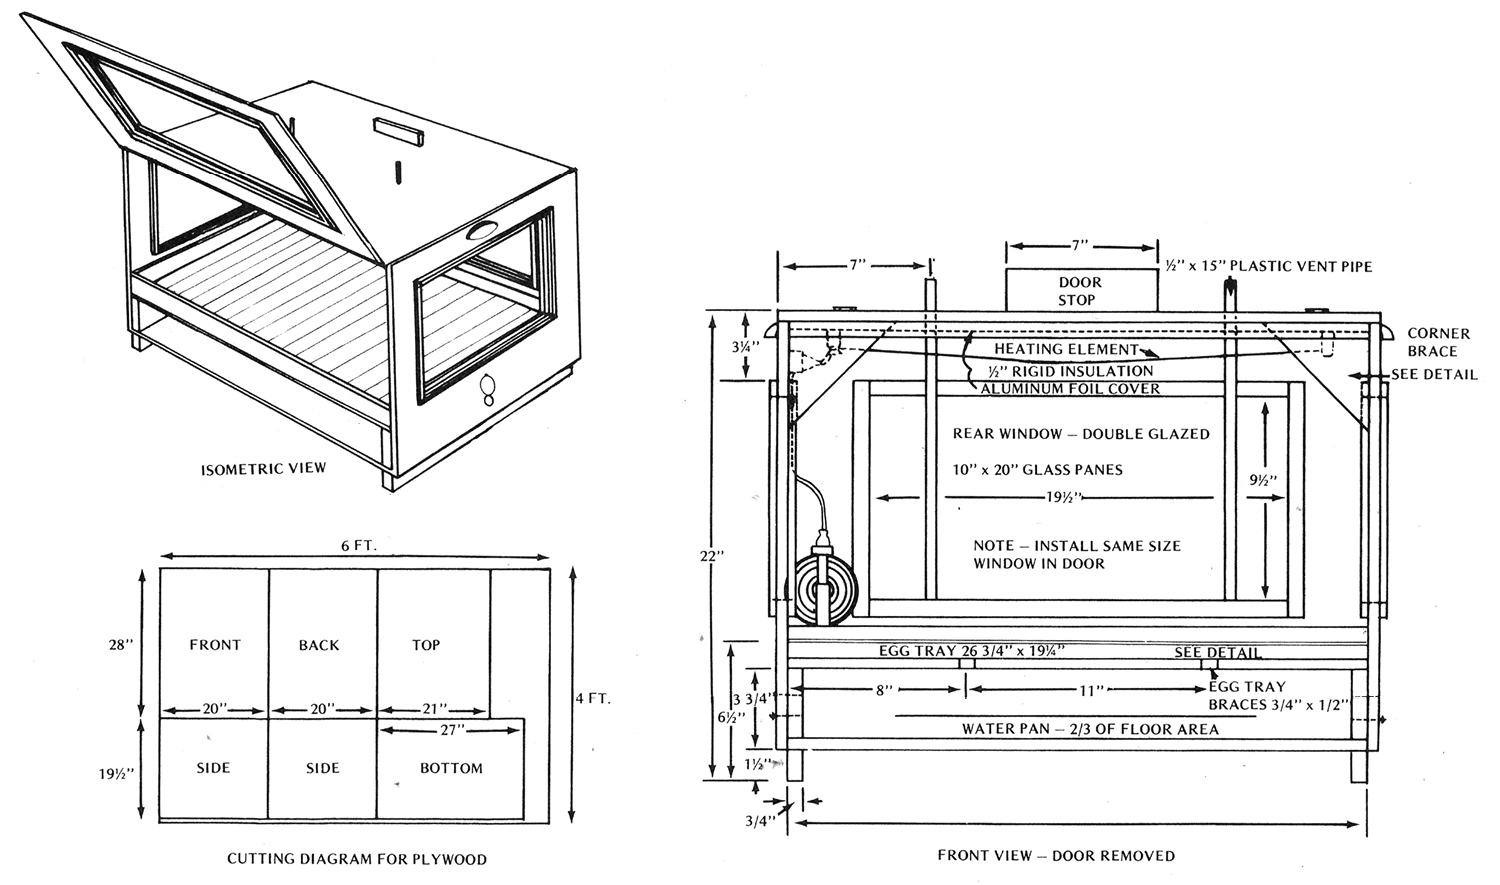 Diagrams show a completed plywood display incubator, a cutting diagram for the plywood, and specific measurements and building plan for the incubator.